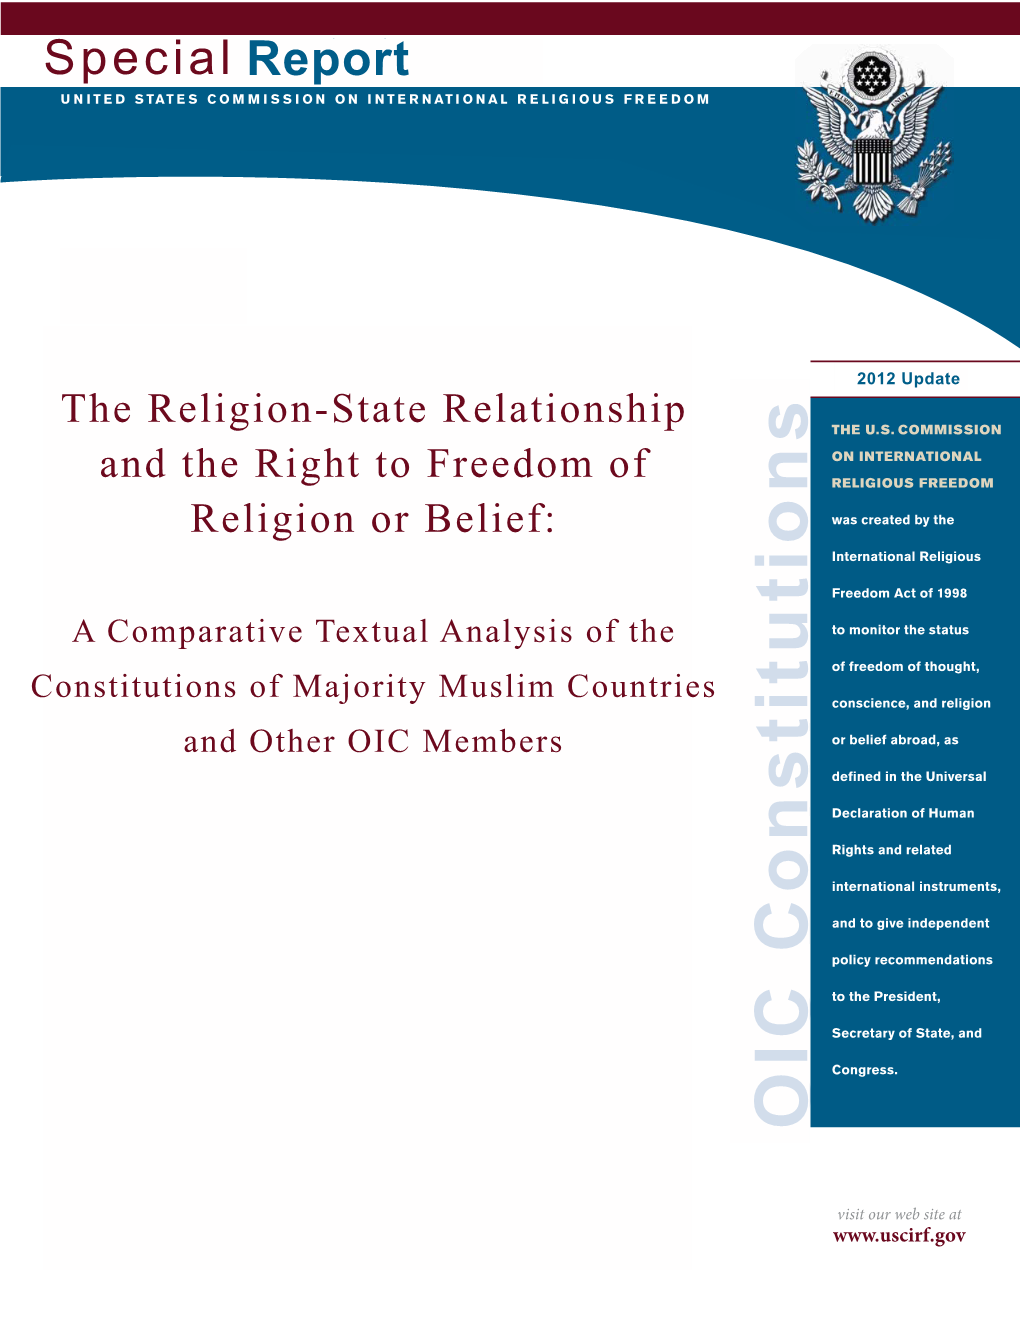 The Religion-State Relationship & the Right to Freedom of Religion Or Belief